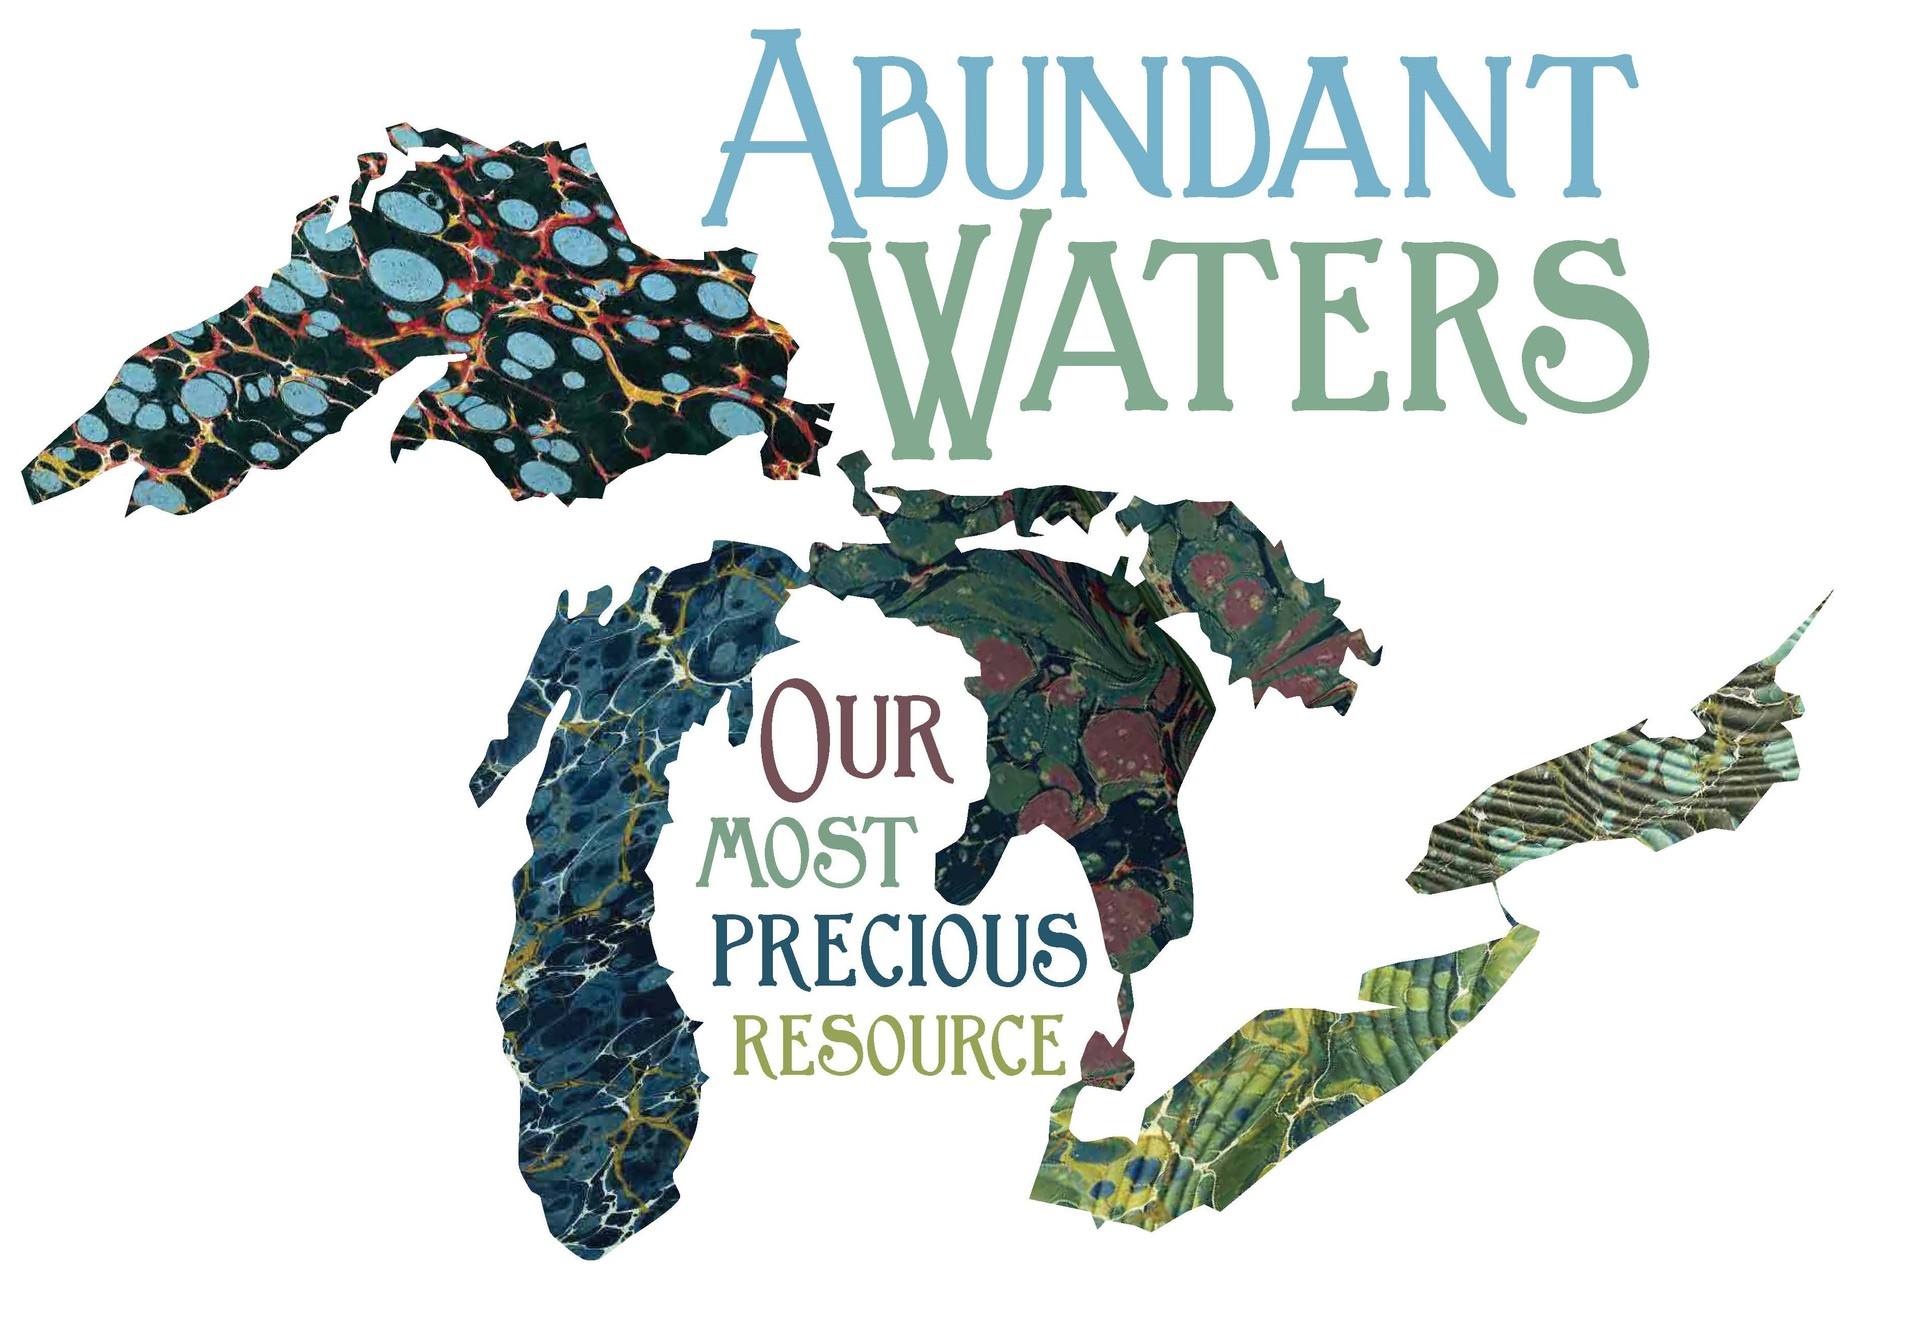 Abundant Waters: Our Most Precious Resource Exhibition Logo